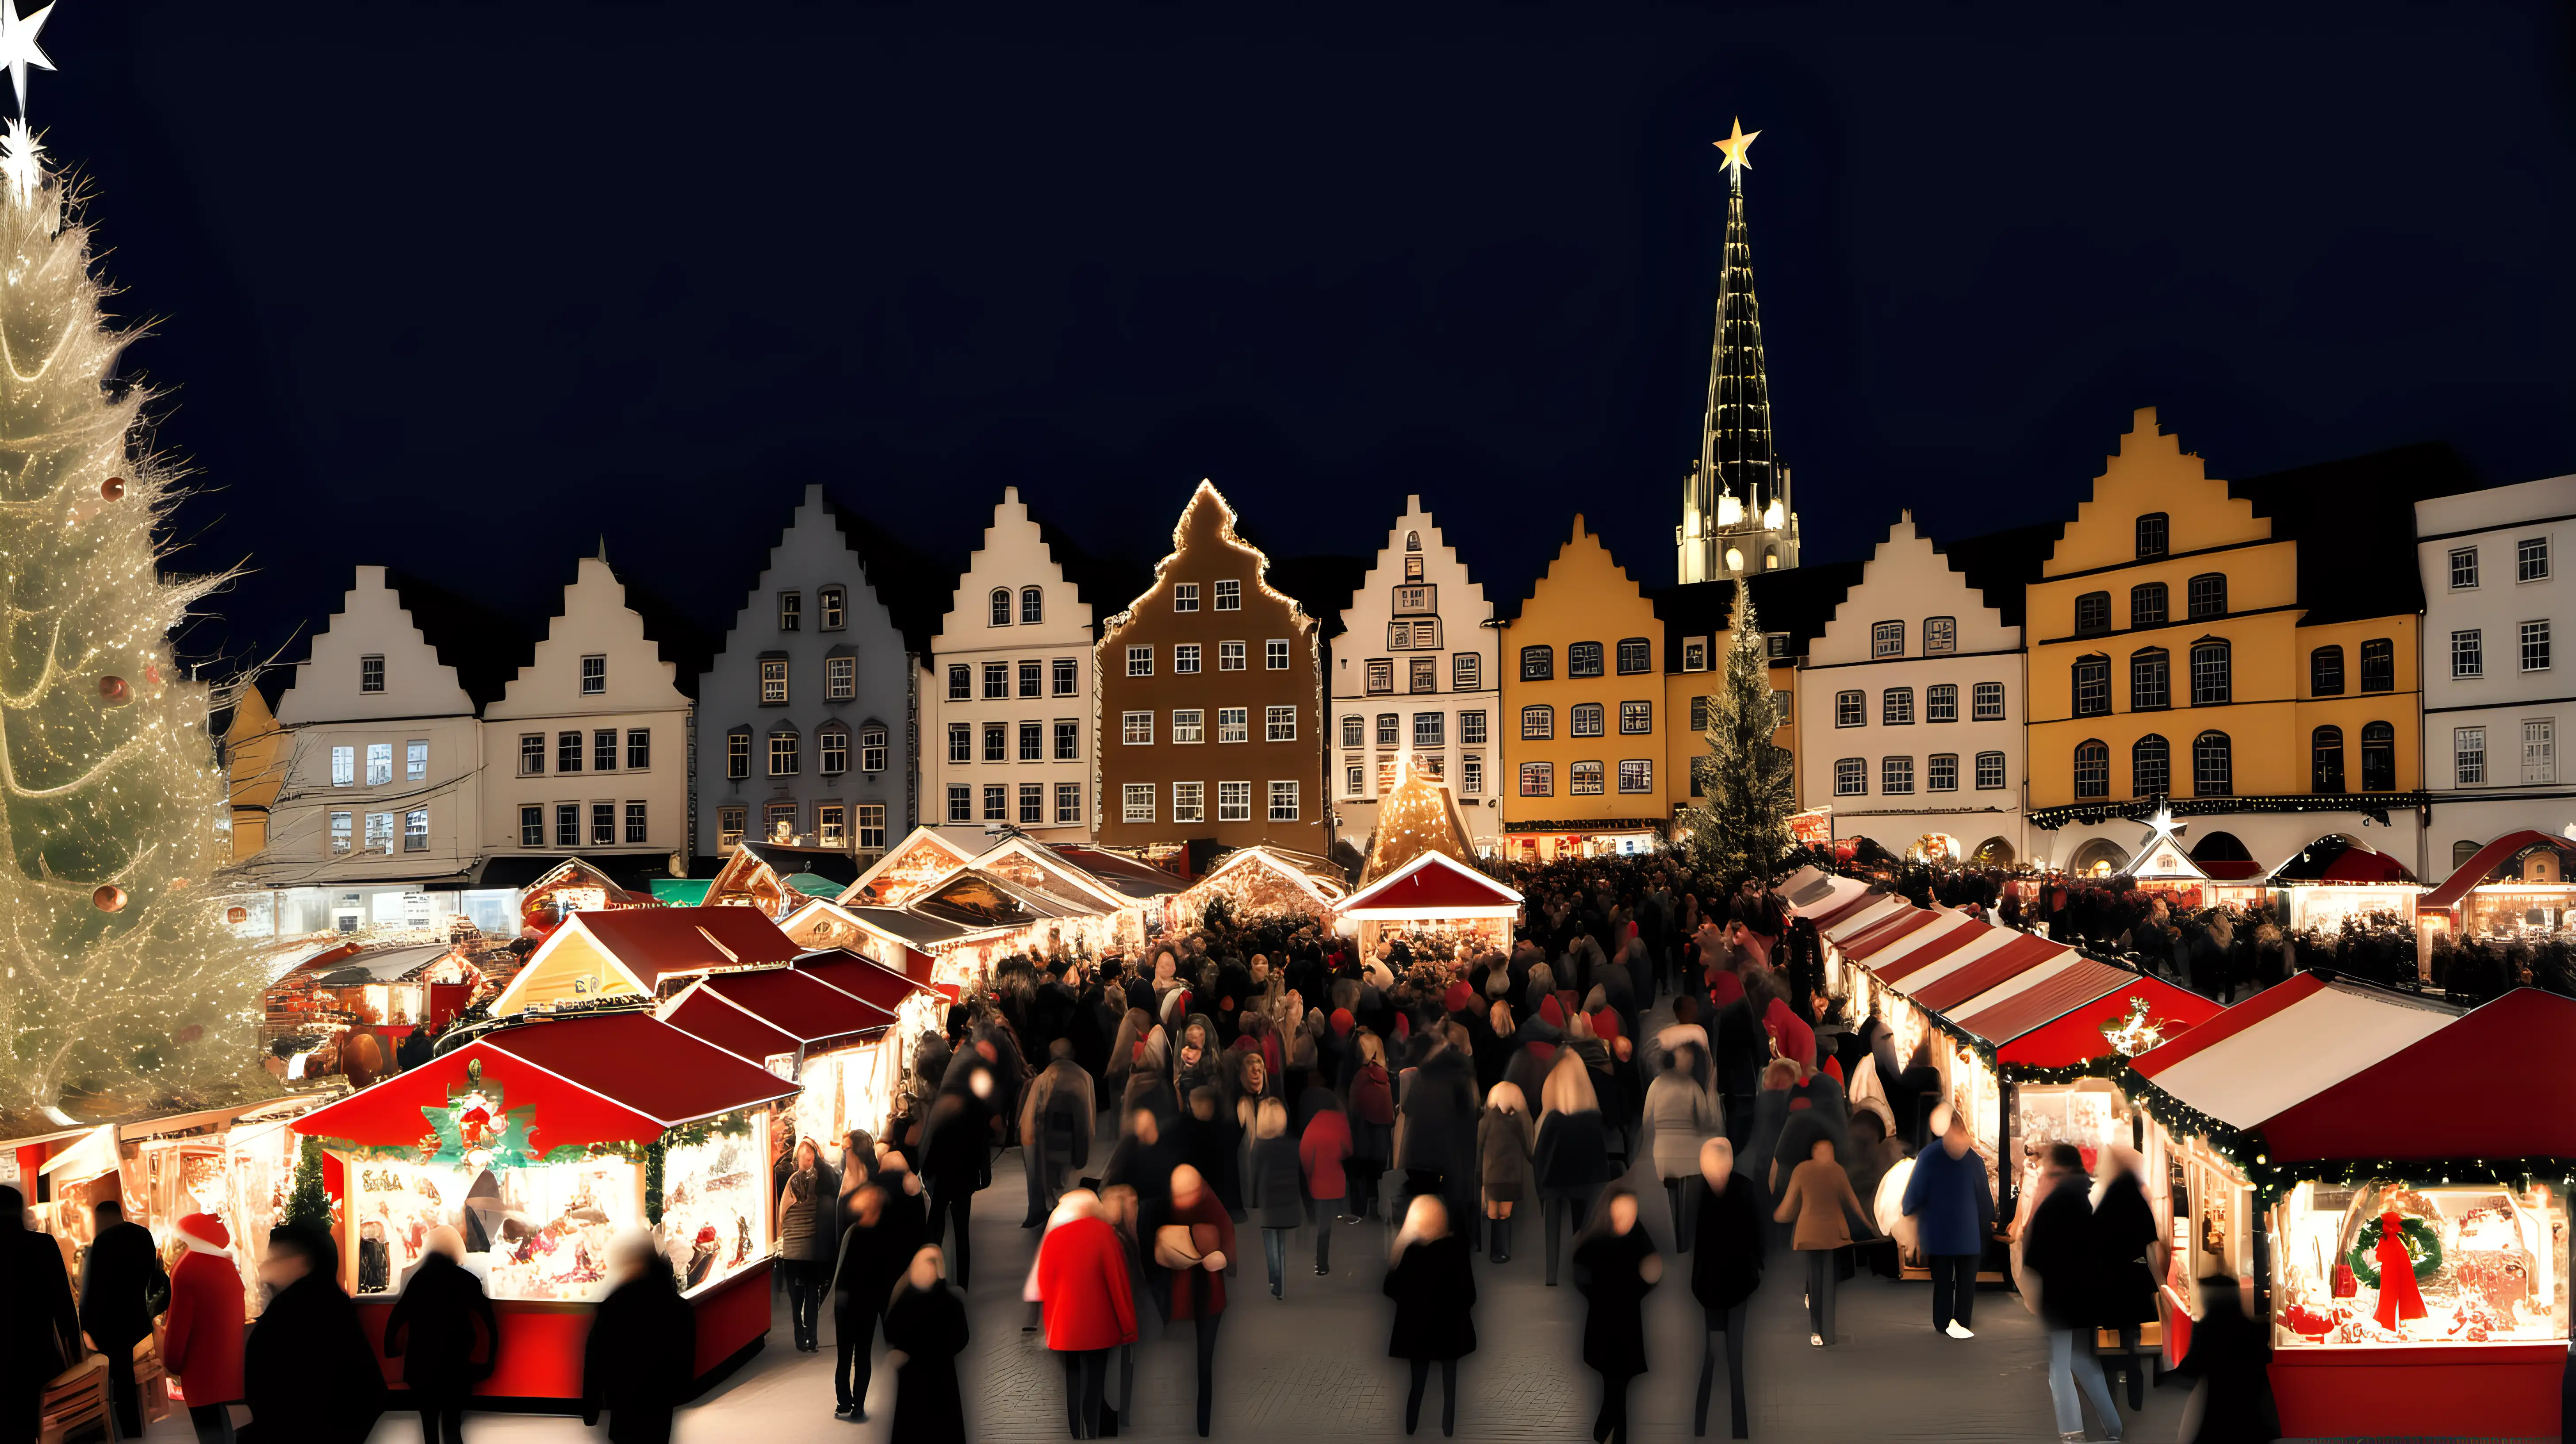 Enchanting Christmas Market with Twinkling Lights and Shoppers